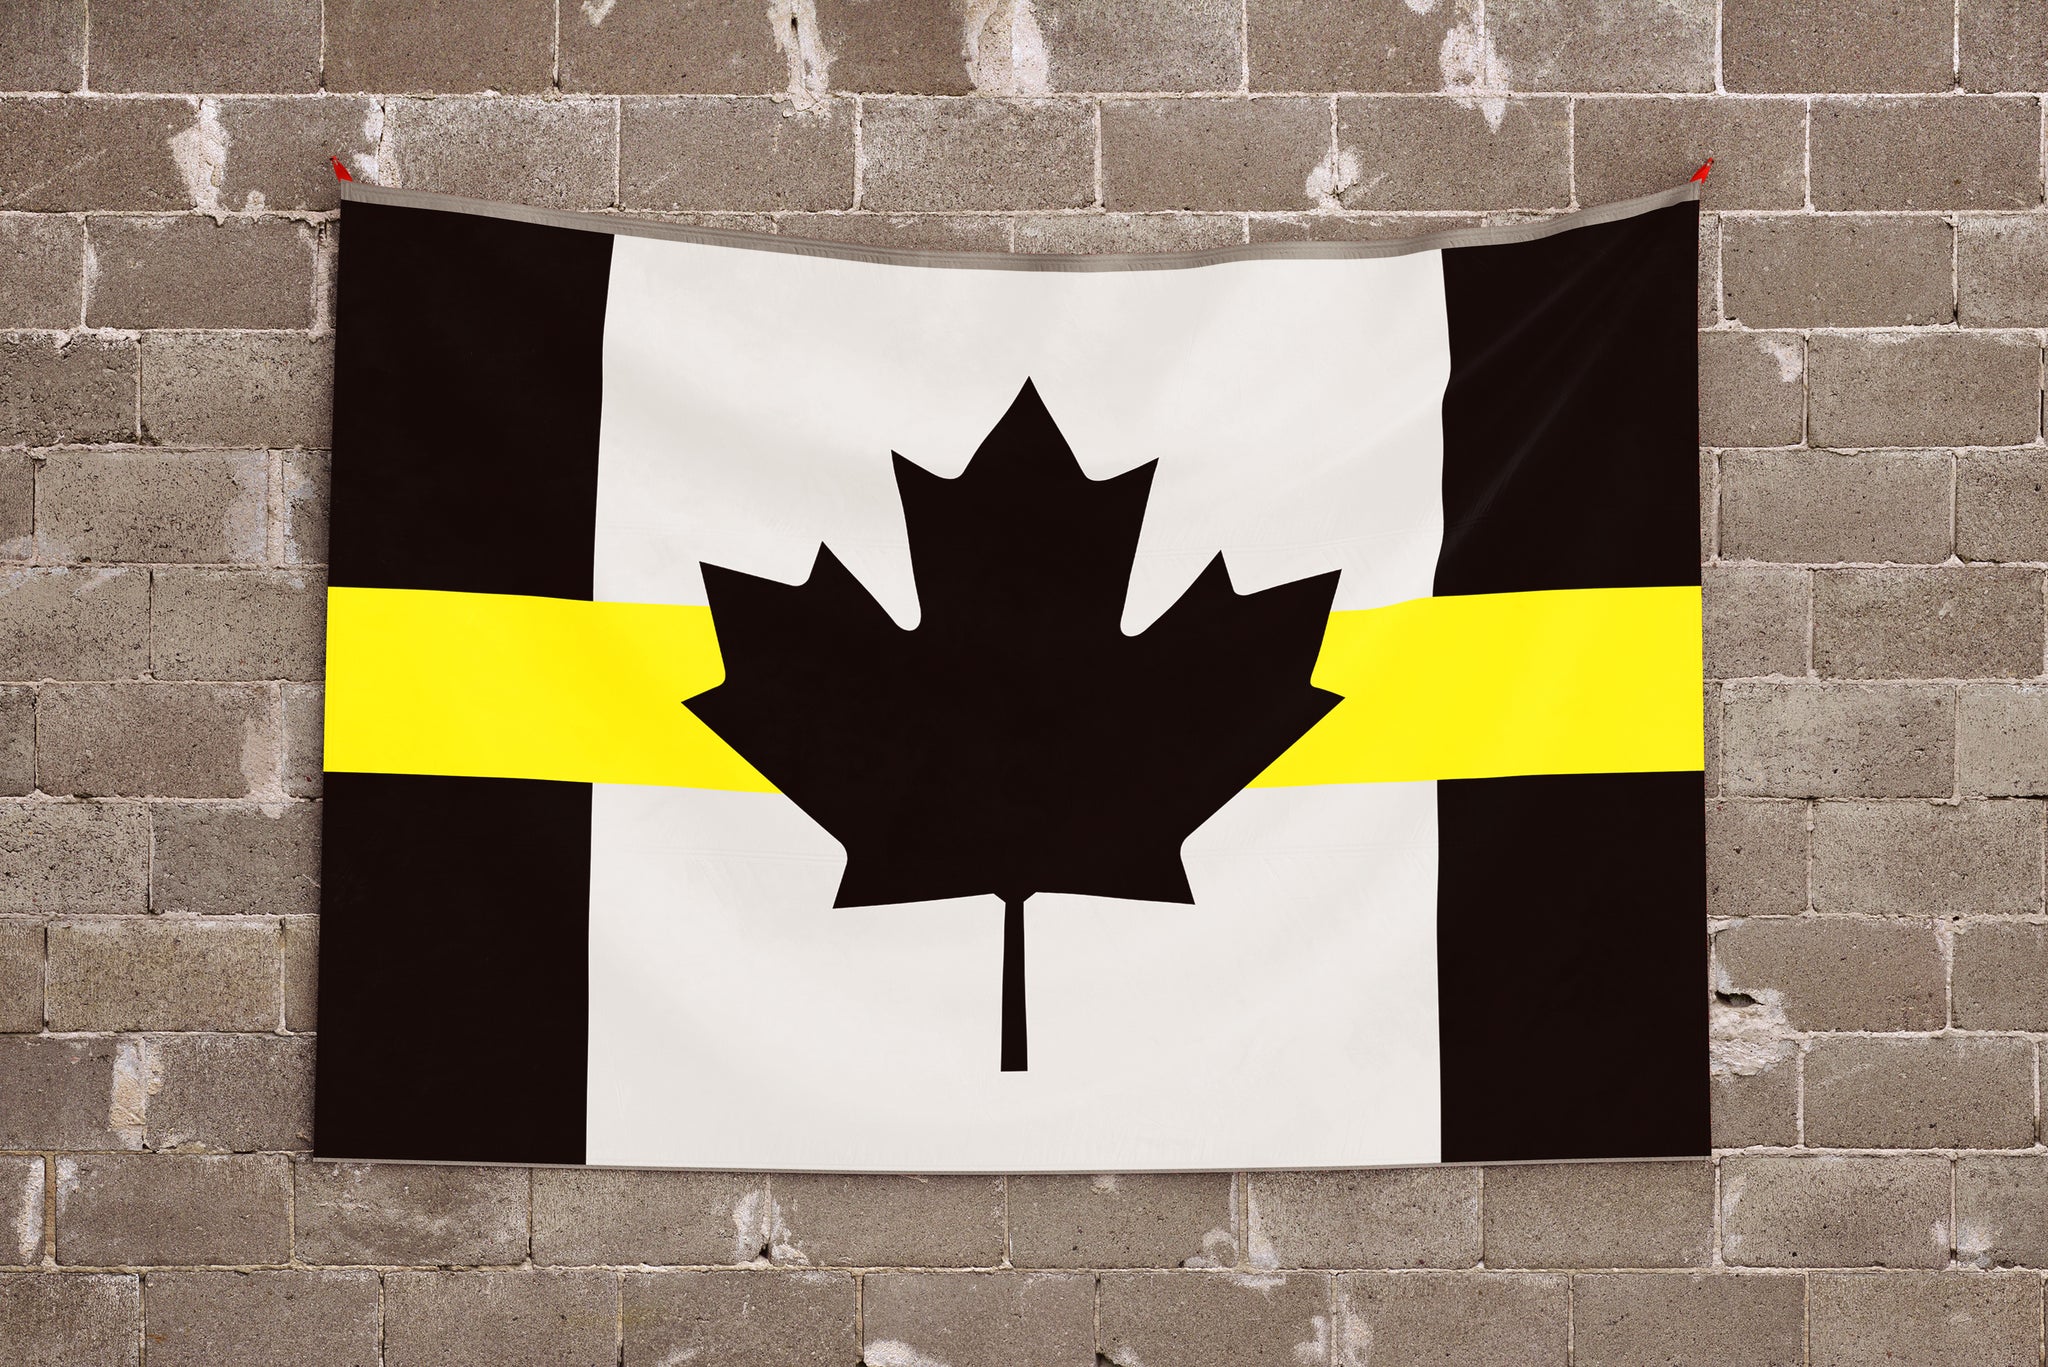 Canadian Maple Leaf Flags